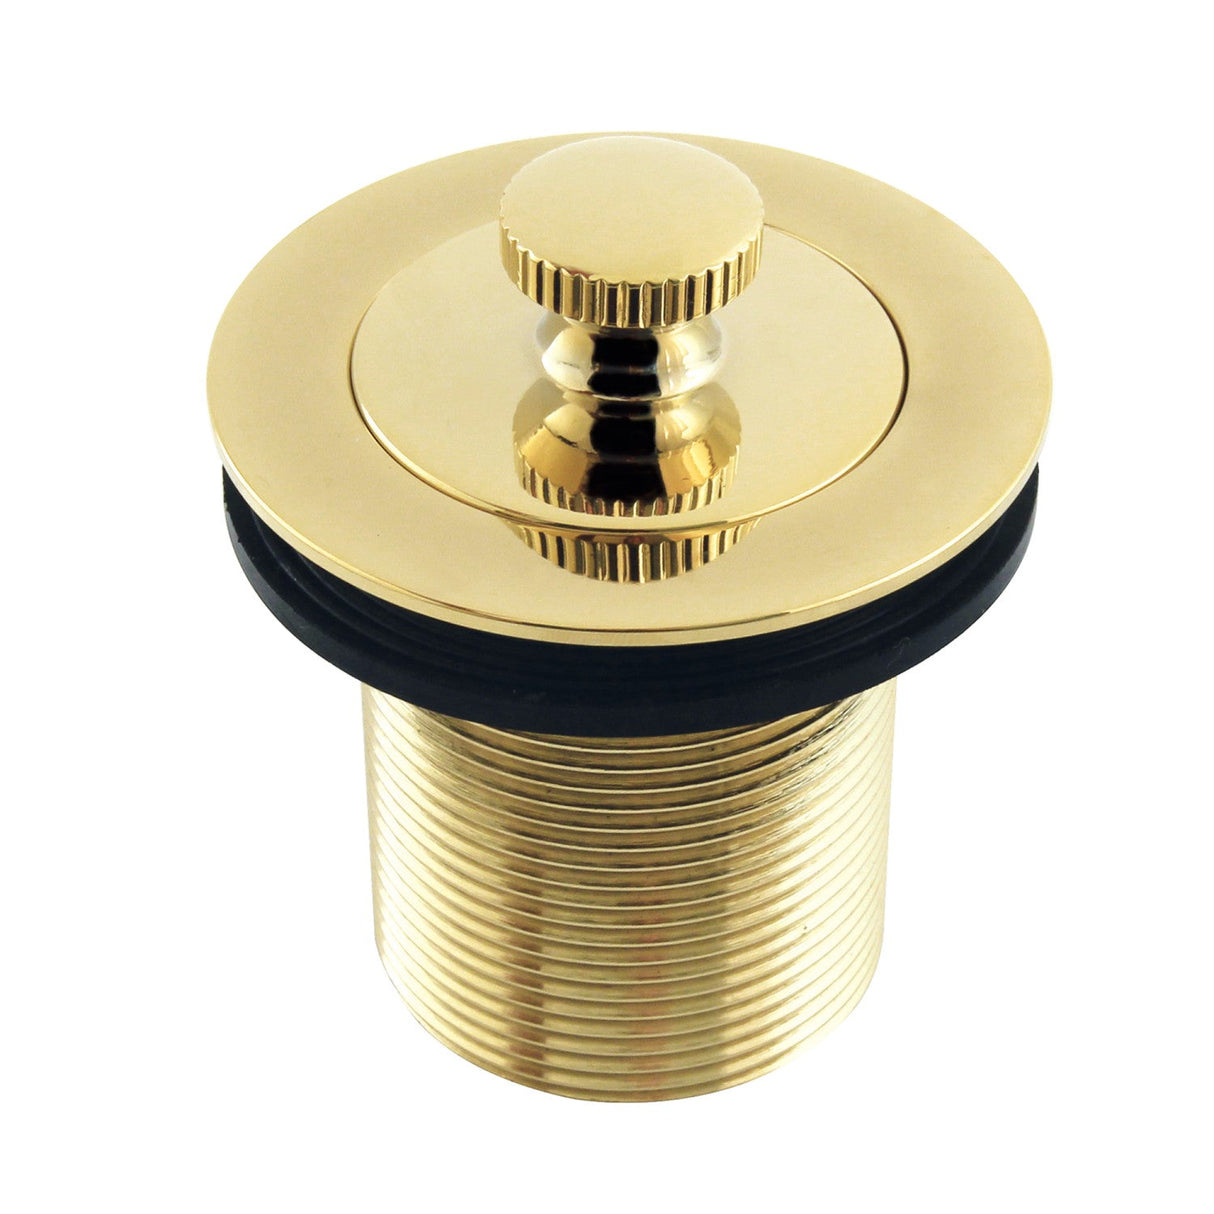 Made To Match DLT20PB 1-1/2-Inch Lift and Turn Tub Drain with 2-Inch Body Thread, Polished Brass